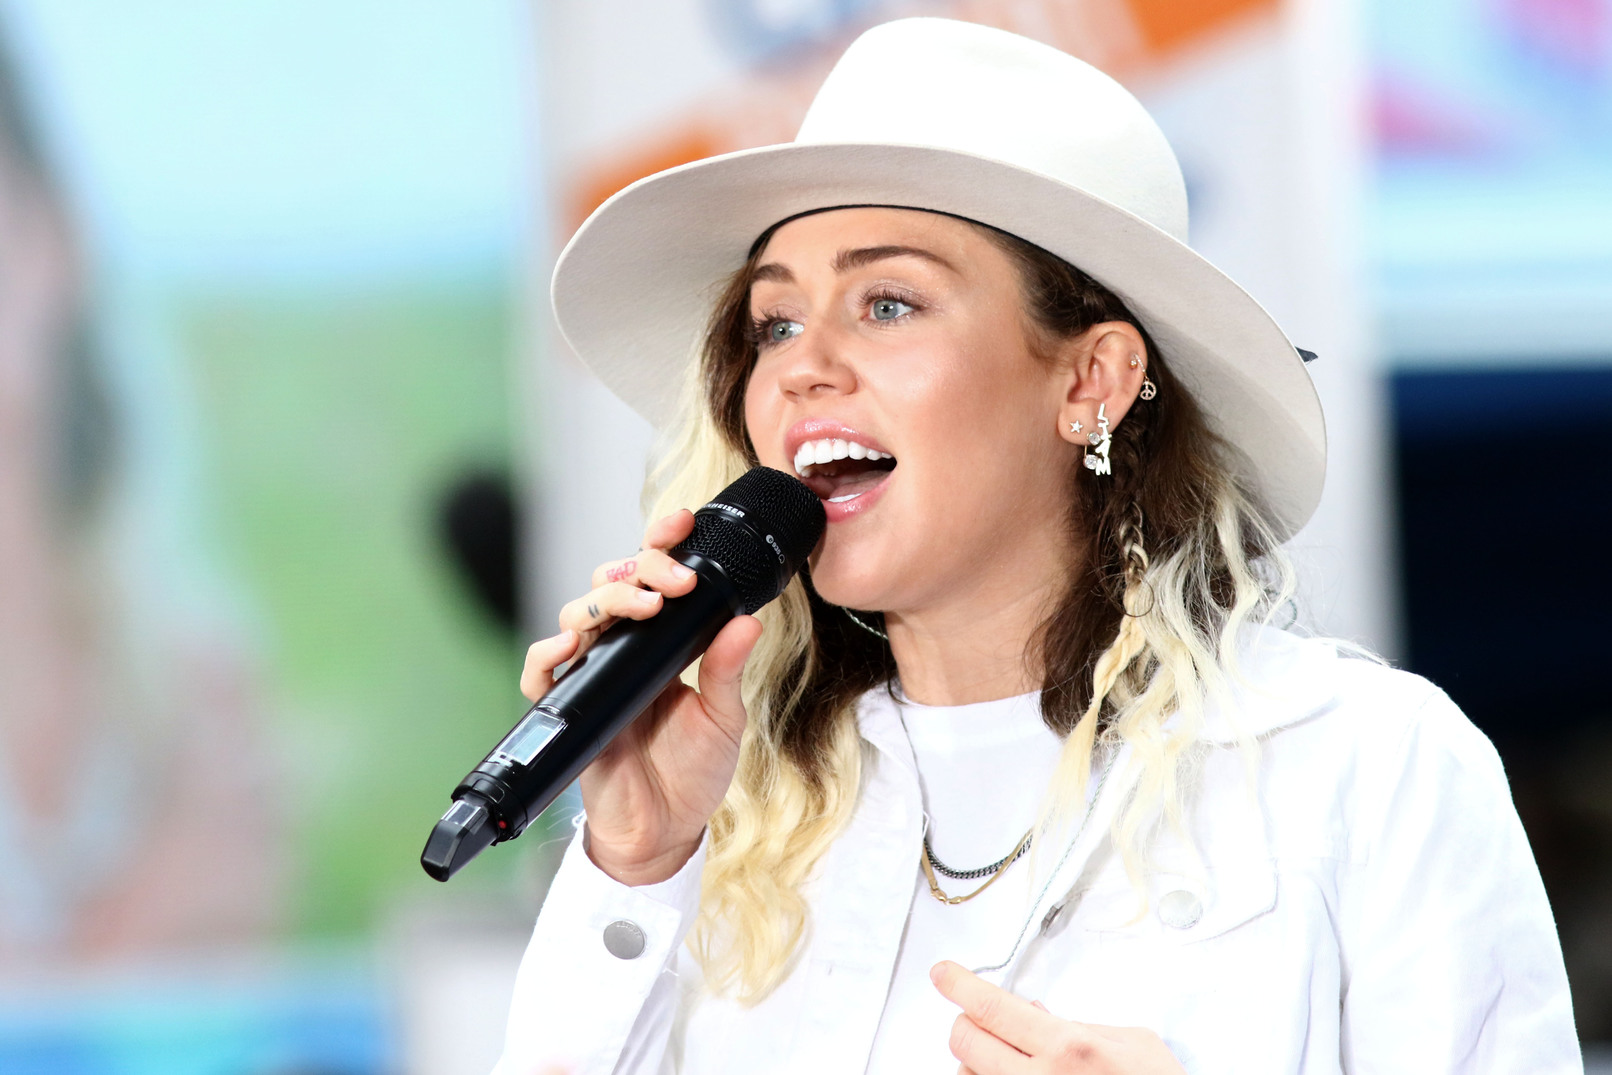 Jamaican Songwriter Files Copyright Lawsuit Against Miley Cyrus